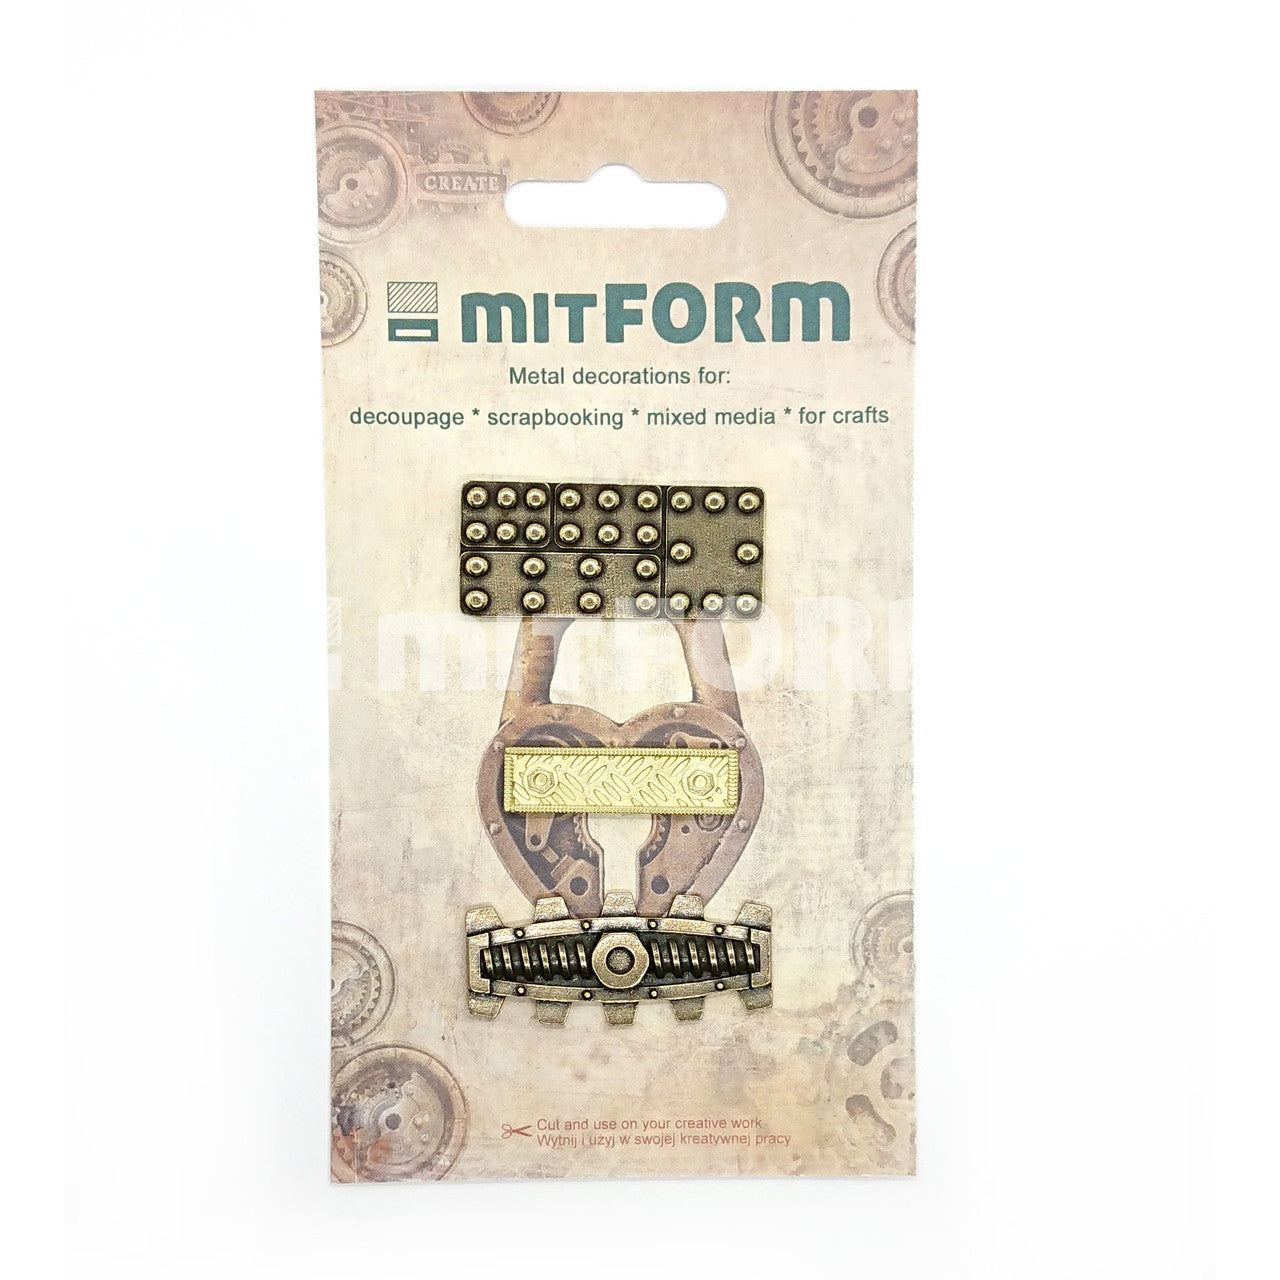 Mitform Castings Set "Corners 12" available at Milton's Daughter. Package photo.